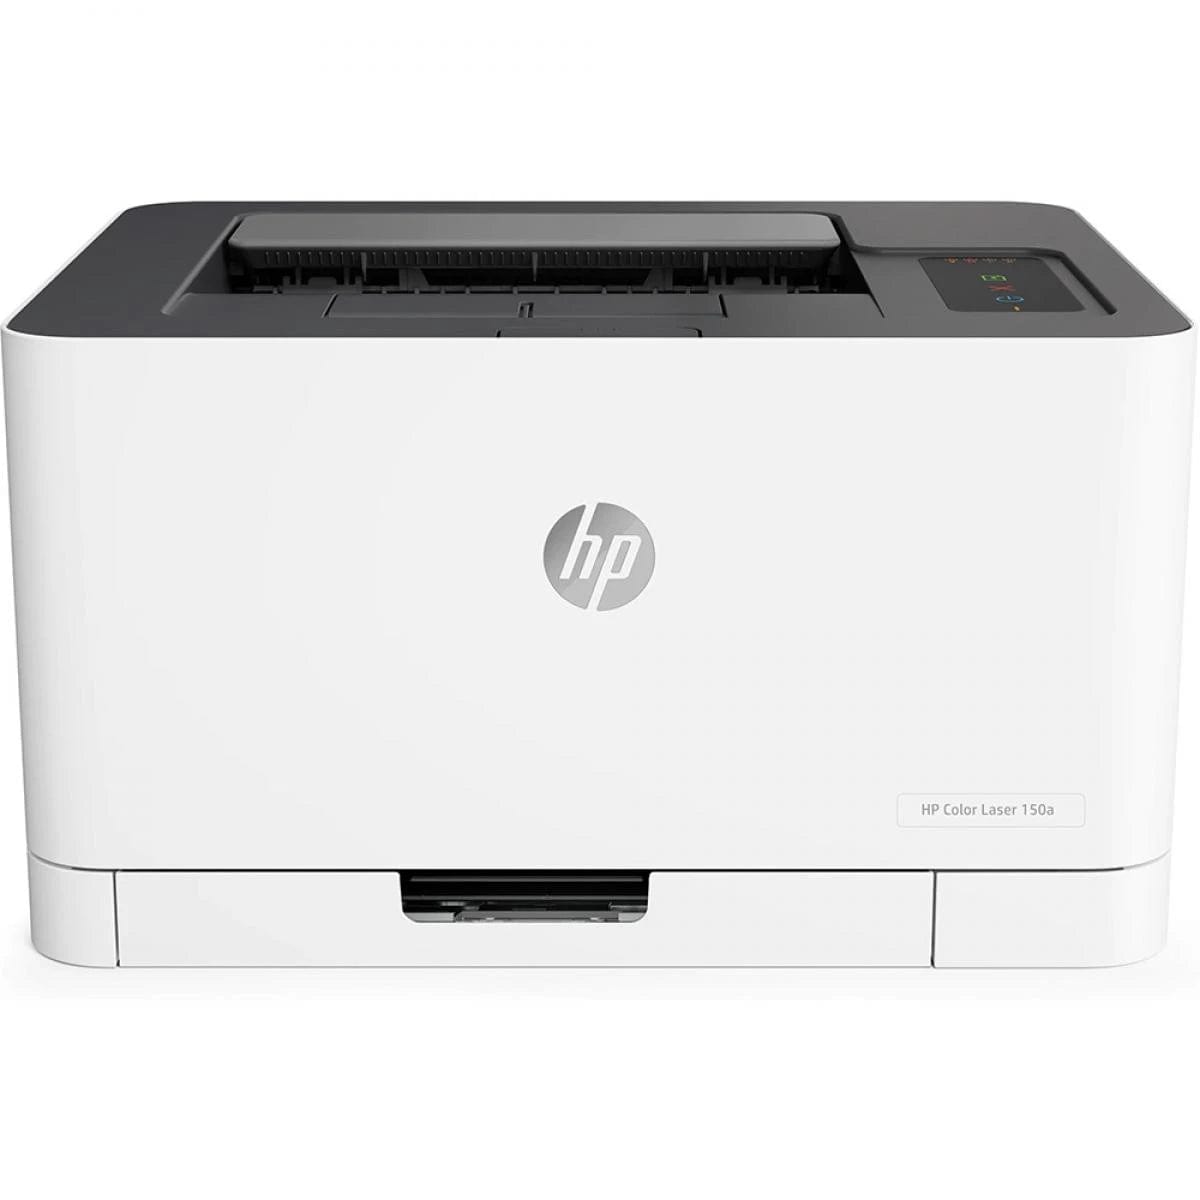 HP Printers HP Color Laser 150a A4 Color Laser Printer For Home & Office up to 18 black /4 Color PPM USB Interface - White